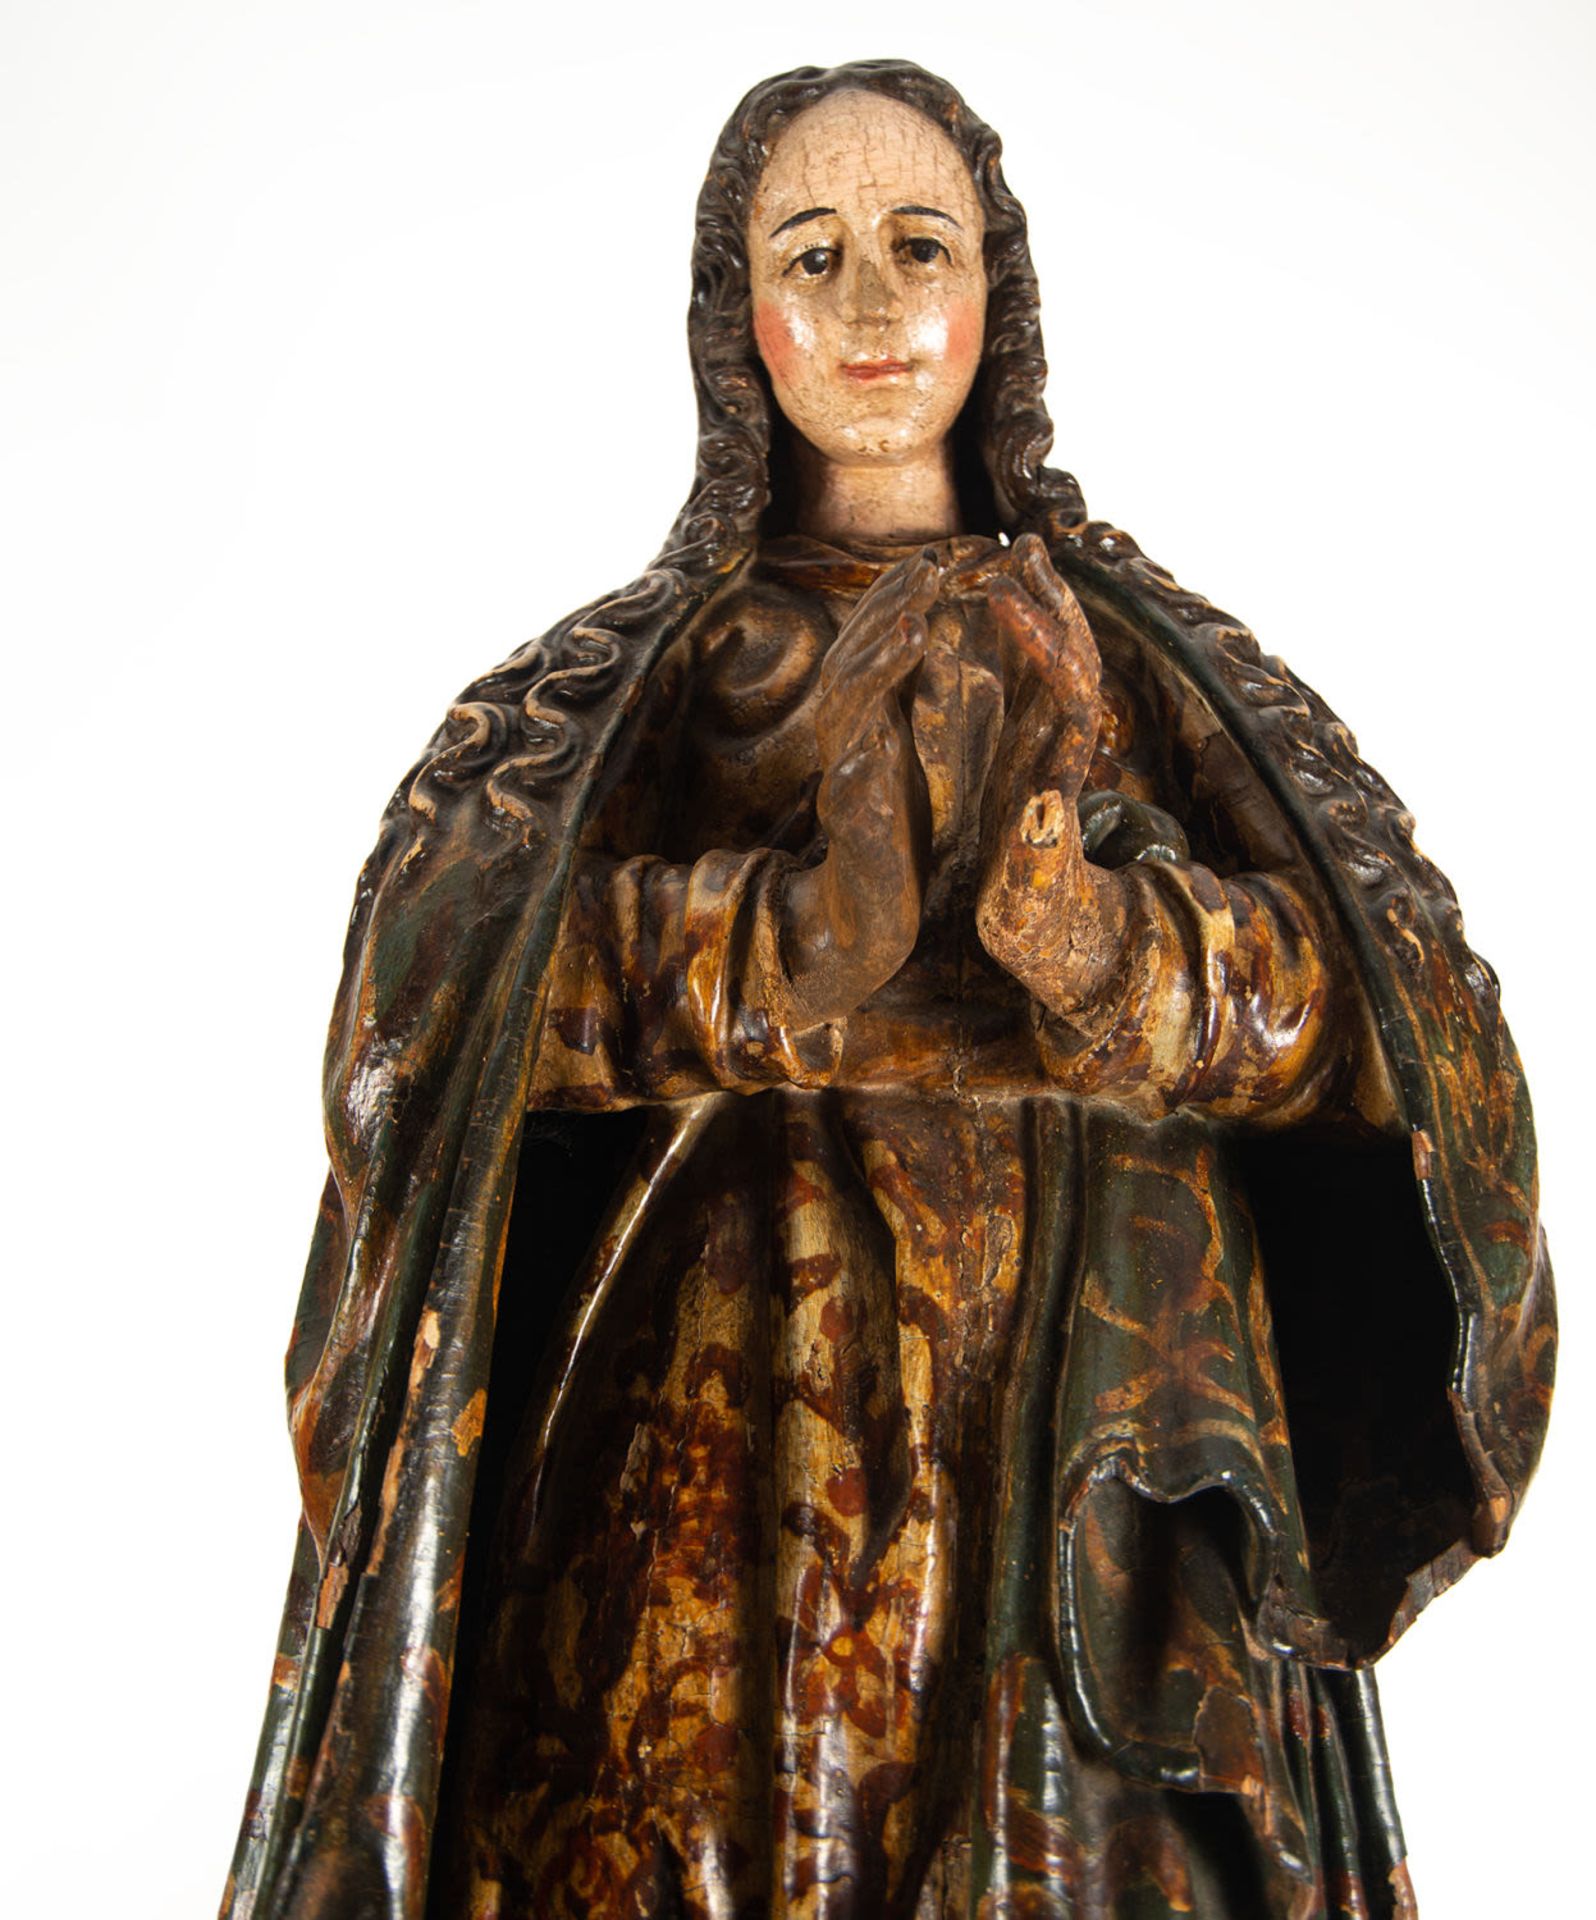 Great Immaculate Virgin, 17th century, possibly Cuzco, 17th century Cuzco colonial school - Image 9 of 14